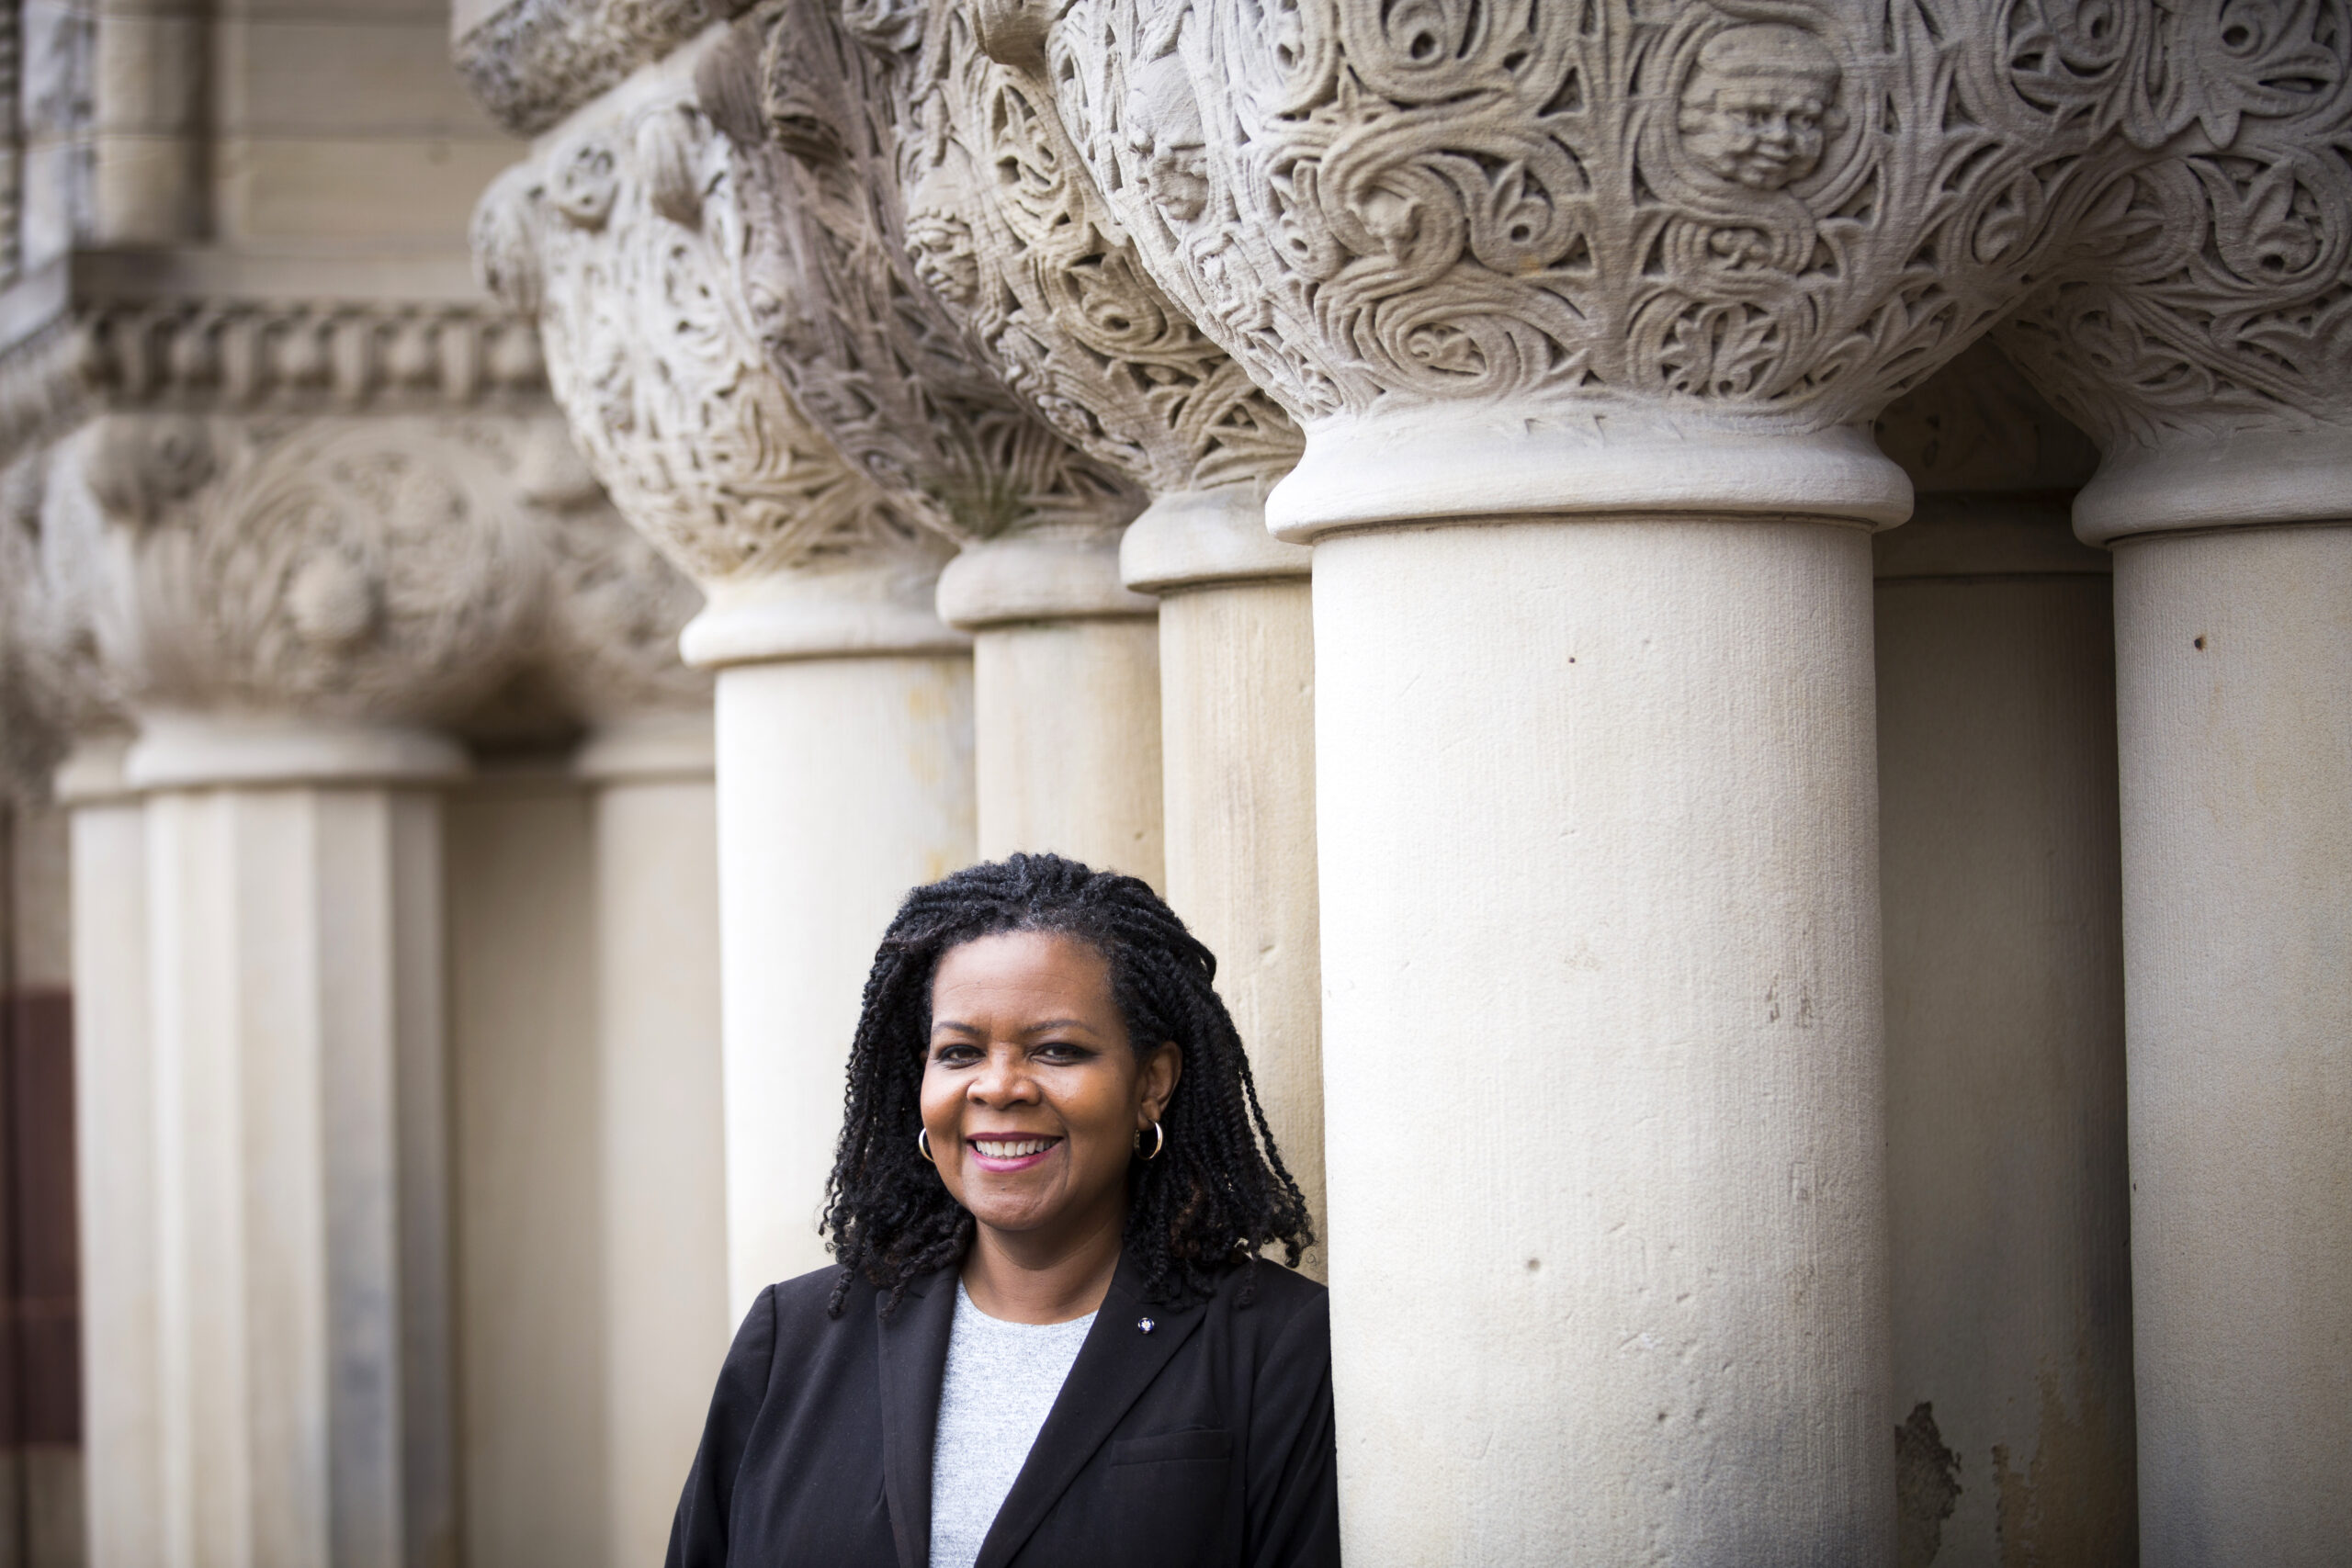 October 14 | Sussman Lecture with Annette Gordon-Reed